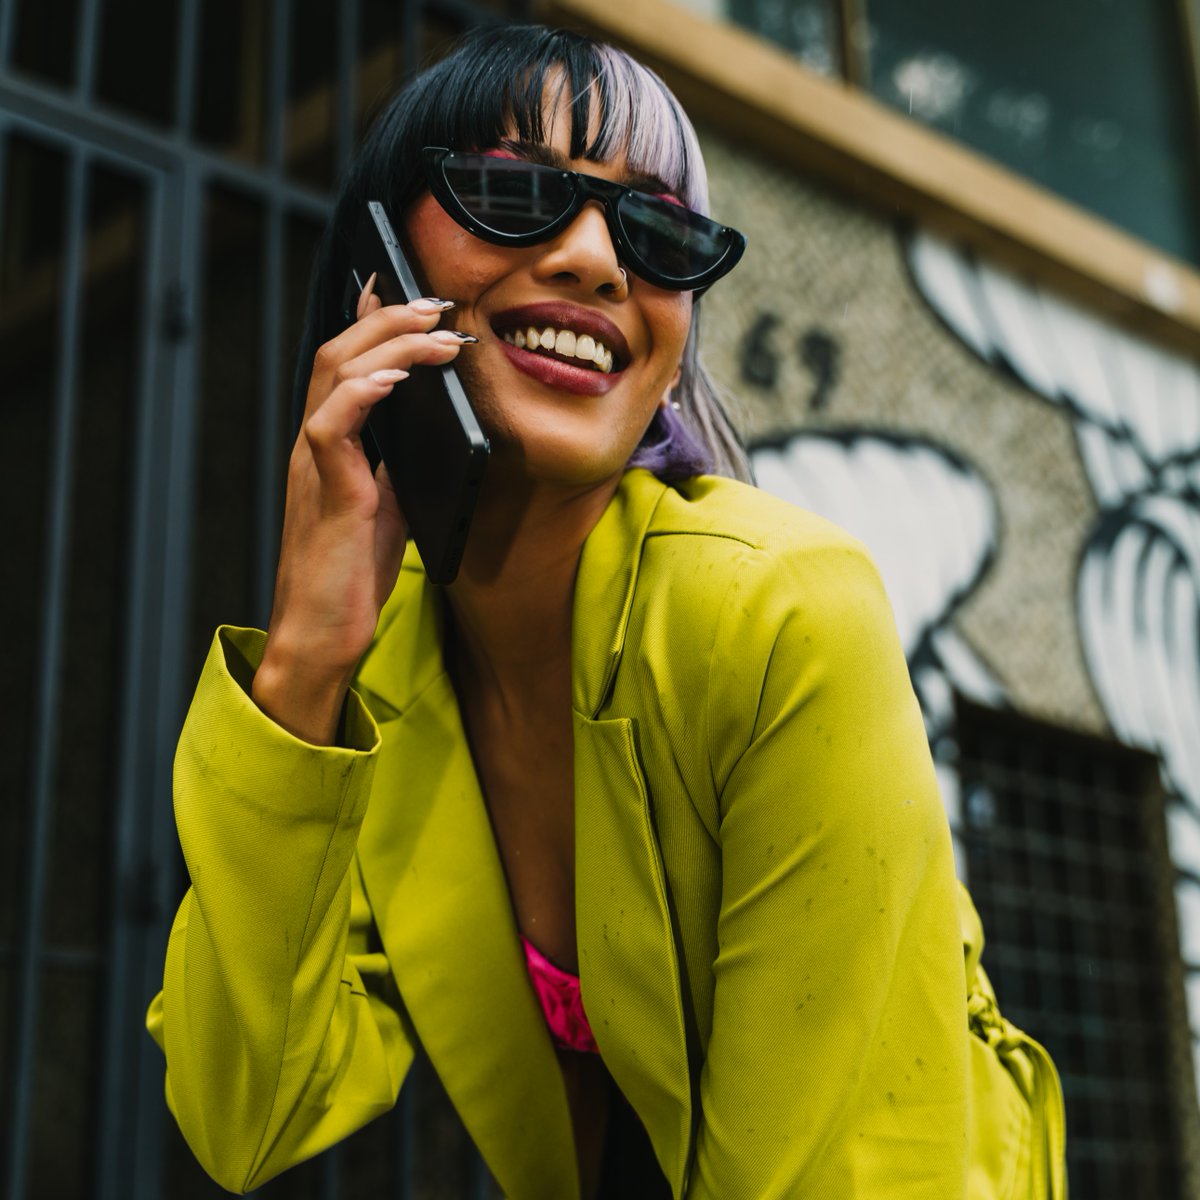 Phone calls never looked this chic! IX Plus for the win! 💁‍♀️📱#Mobicel #IXPlus